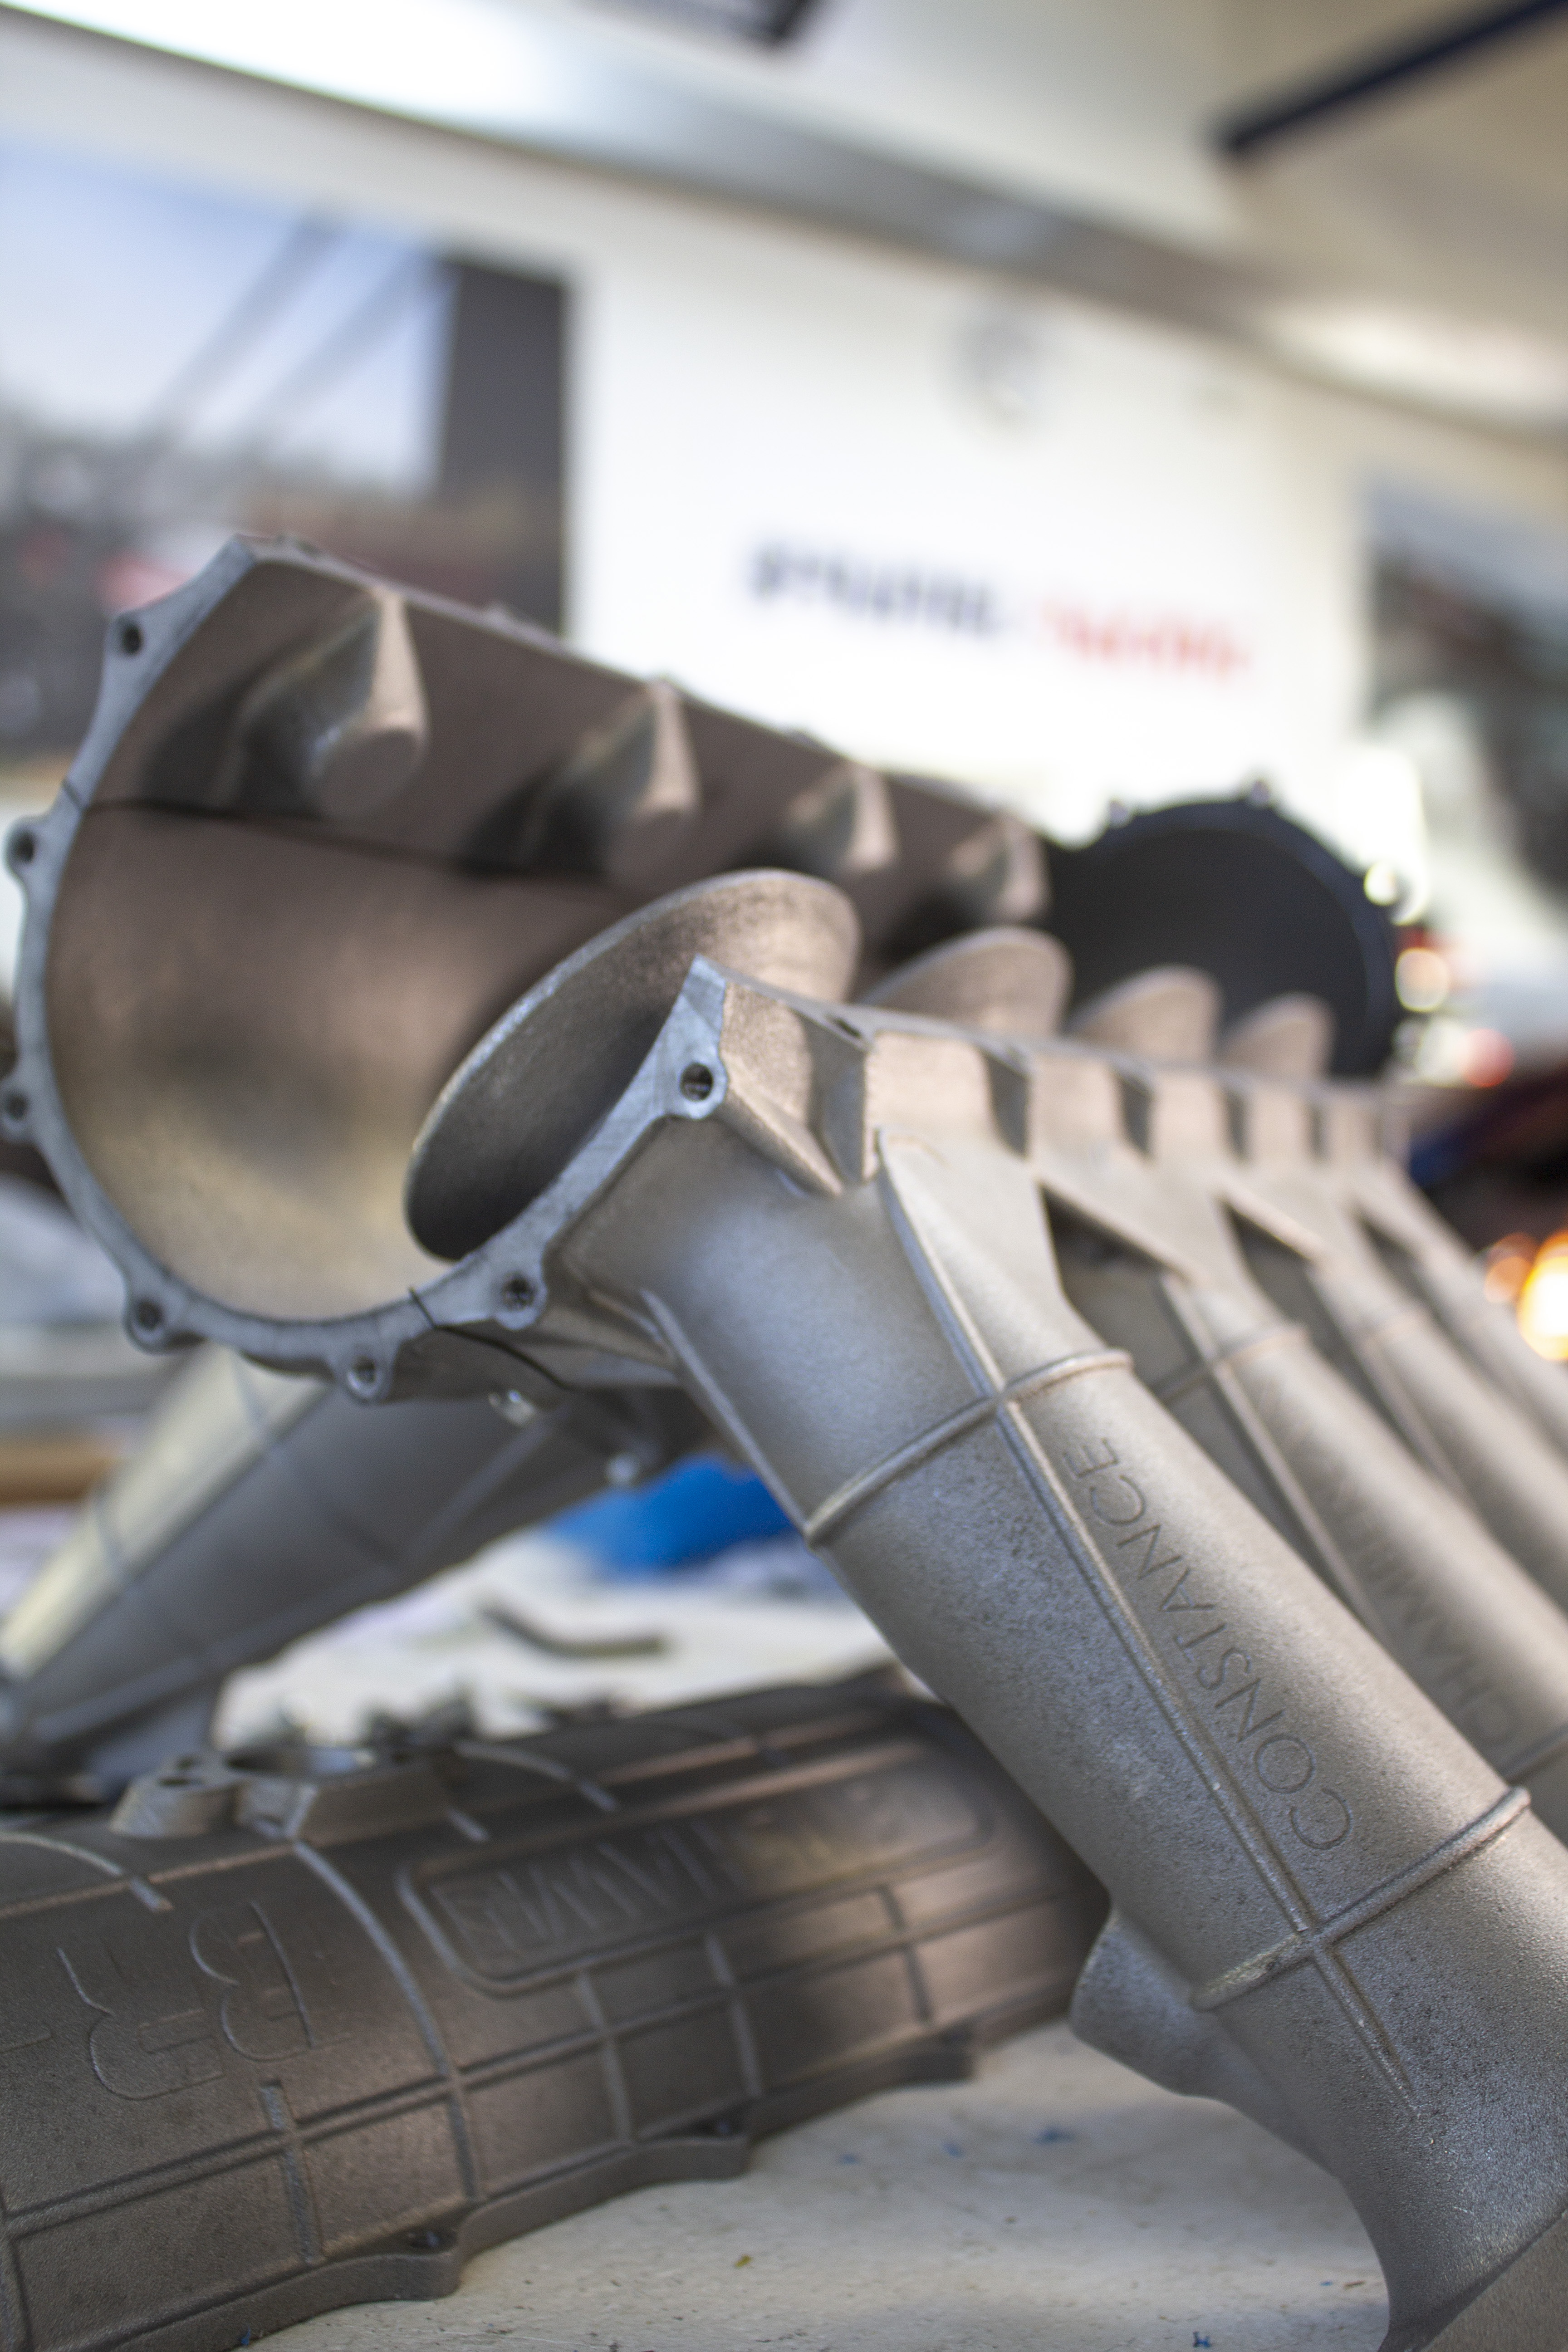 The Brunel University London race team has created a 3D printed manifold part for its BR-XX car.